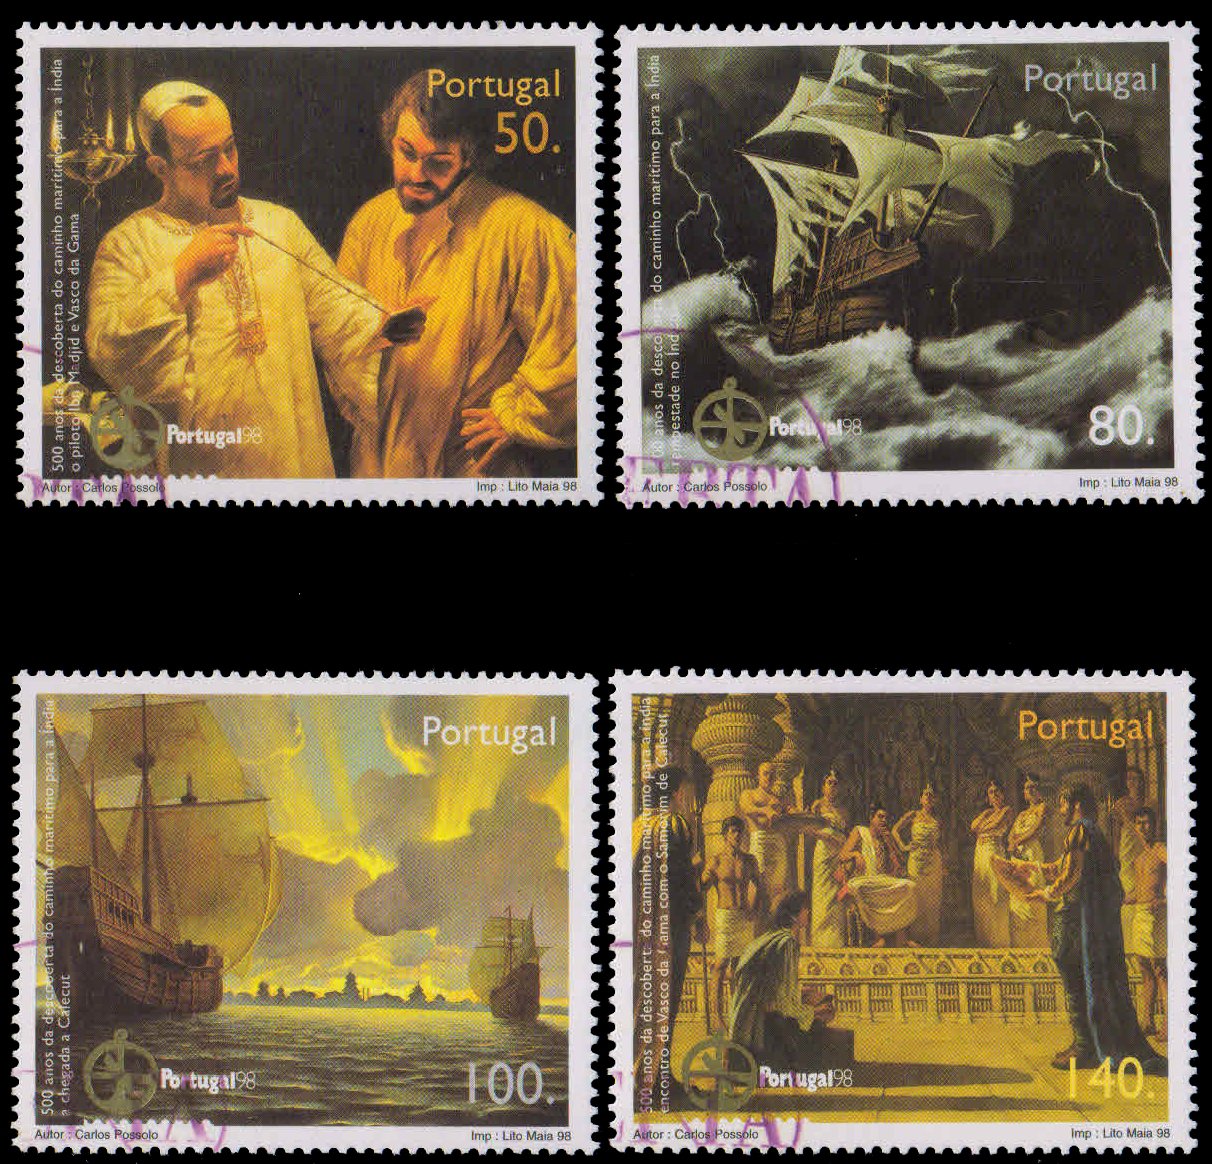 PORTUGAL 1998-500th Anniv. of Discovery of Sea Route to India by Vasco da Gama, 3rd issue, Set of 4, Used, S.G. 2676-2679